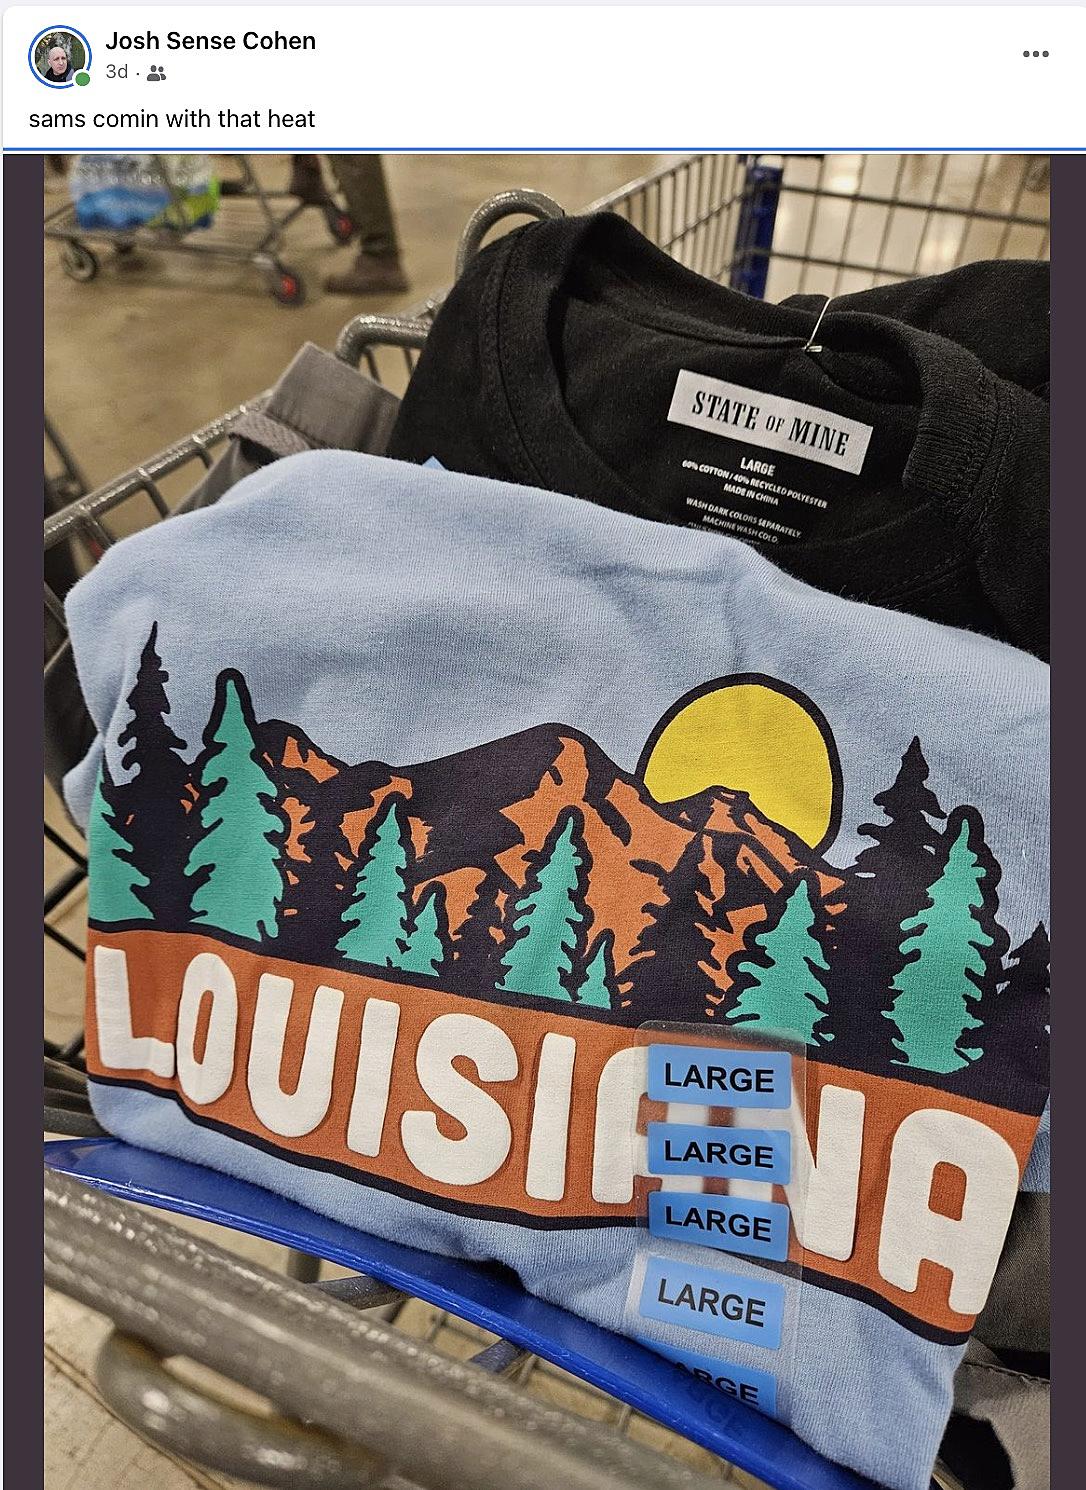 Mountains in Louisiana? A t-shirt says yes.